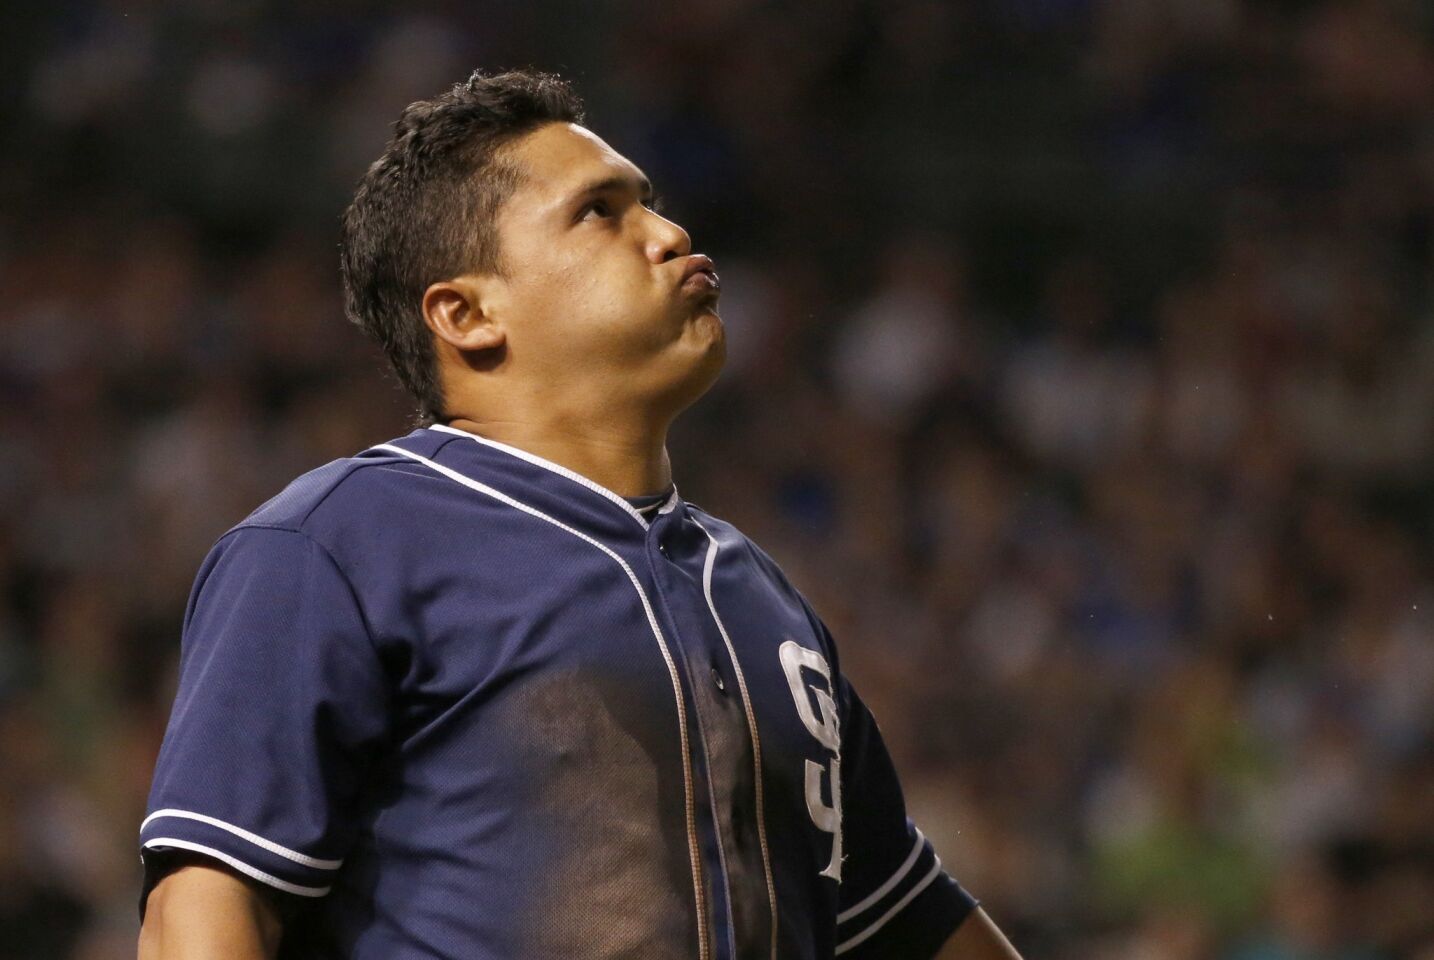 The San Diego Padres shortstop, who had a career-high 44 stolen bases last season, was suspended 50 games,/a> by Major League Baseball for using performance-enhancing drugs.